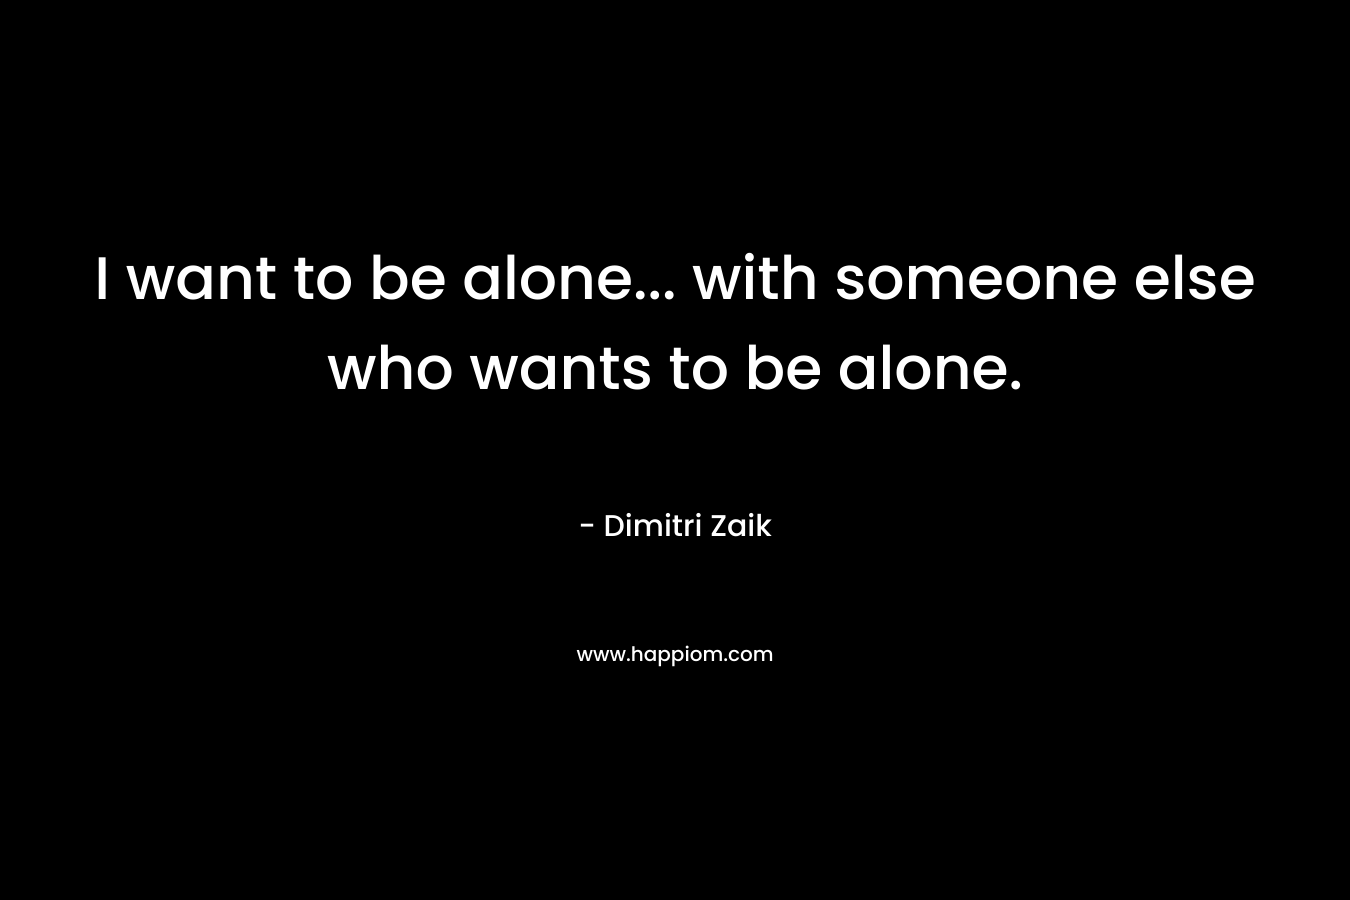 I want to be alone... with someone else who wants to be alone.